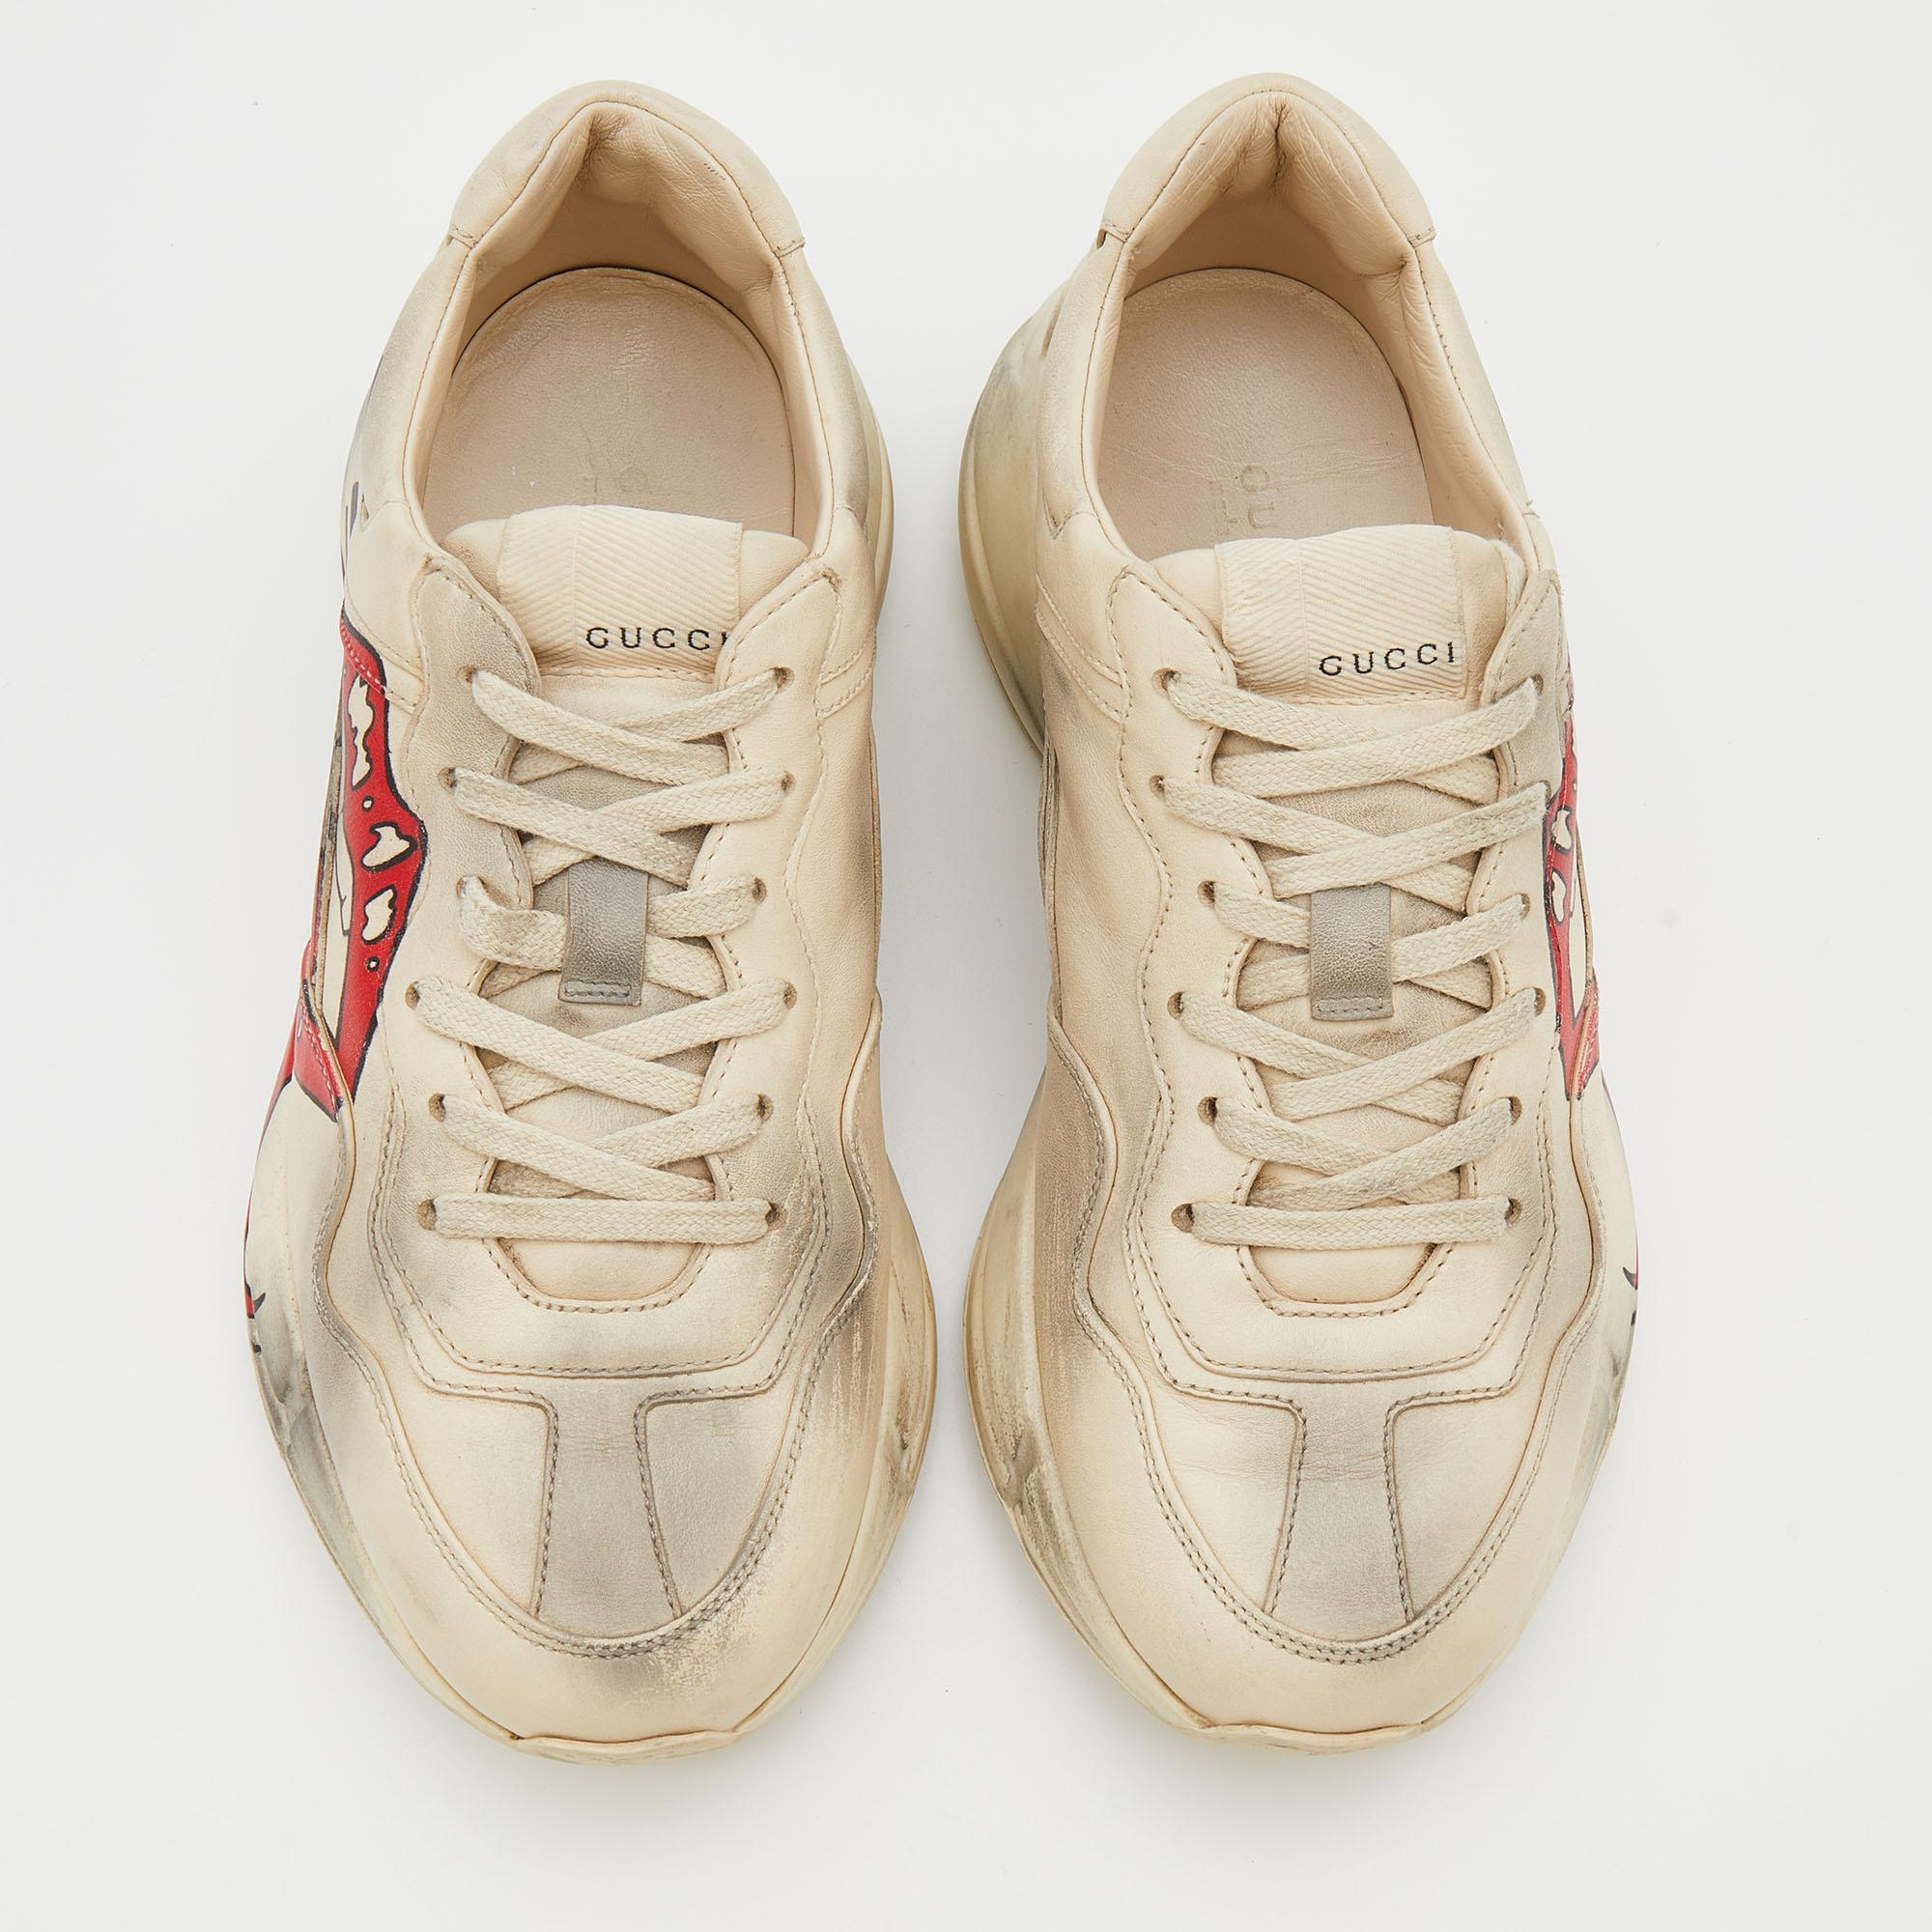 The time to feel trendy is now as Gucci brings you these superhit Rhyton sneakers in cream and grey. They are crafted from leather, detailed with lace-ups, signature elements, and are set on highly comfortable soles.

